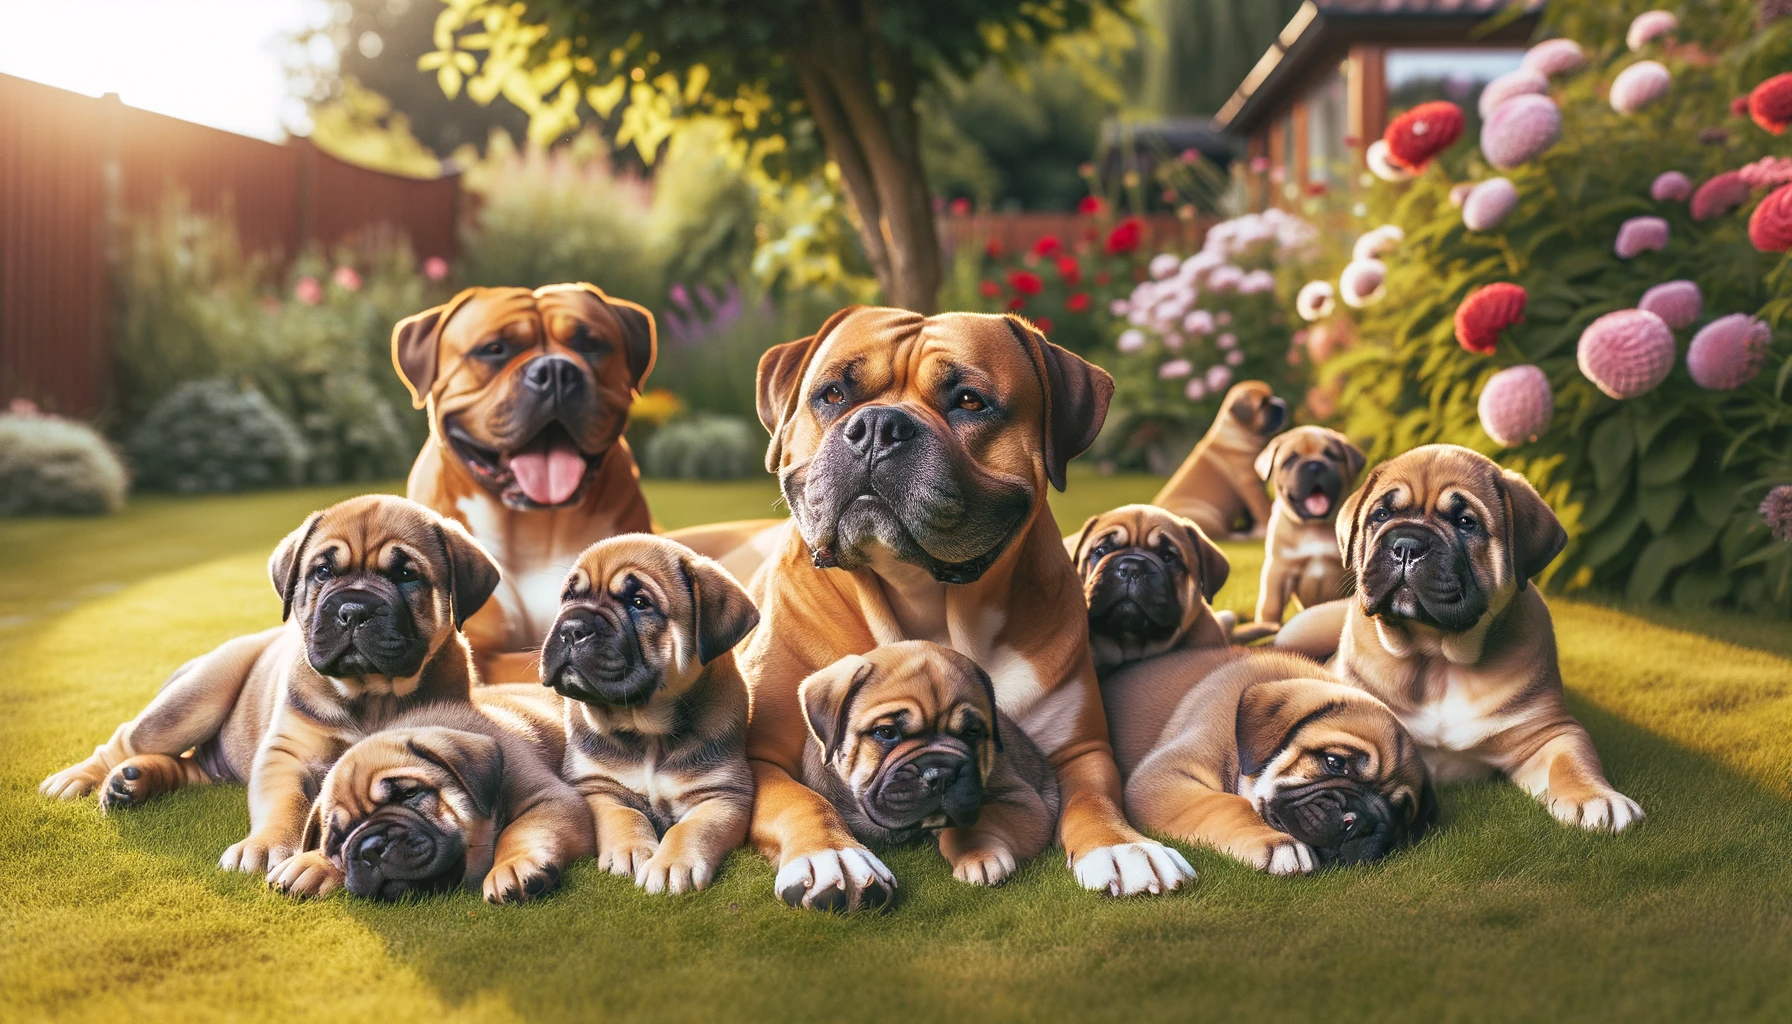 Photo of a picturesque family of Bullador dogs lounging in a well-kept backyard. Adult dogs and playful puppies lie comfortably on the grass, some basking in the sun while others playfully interact. Trees and flowers frame the scene, capturing the heartwarming bond and charm of the breed.